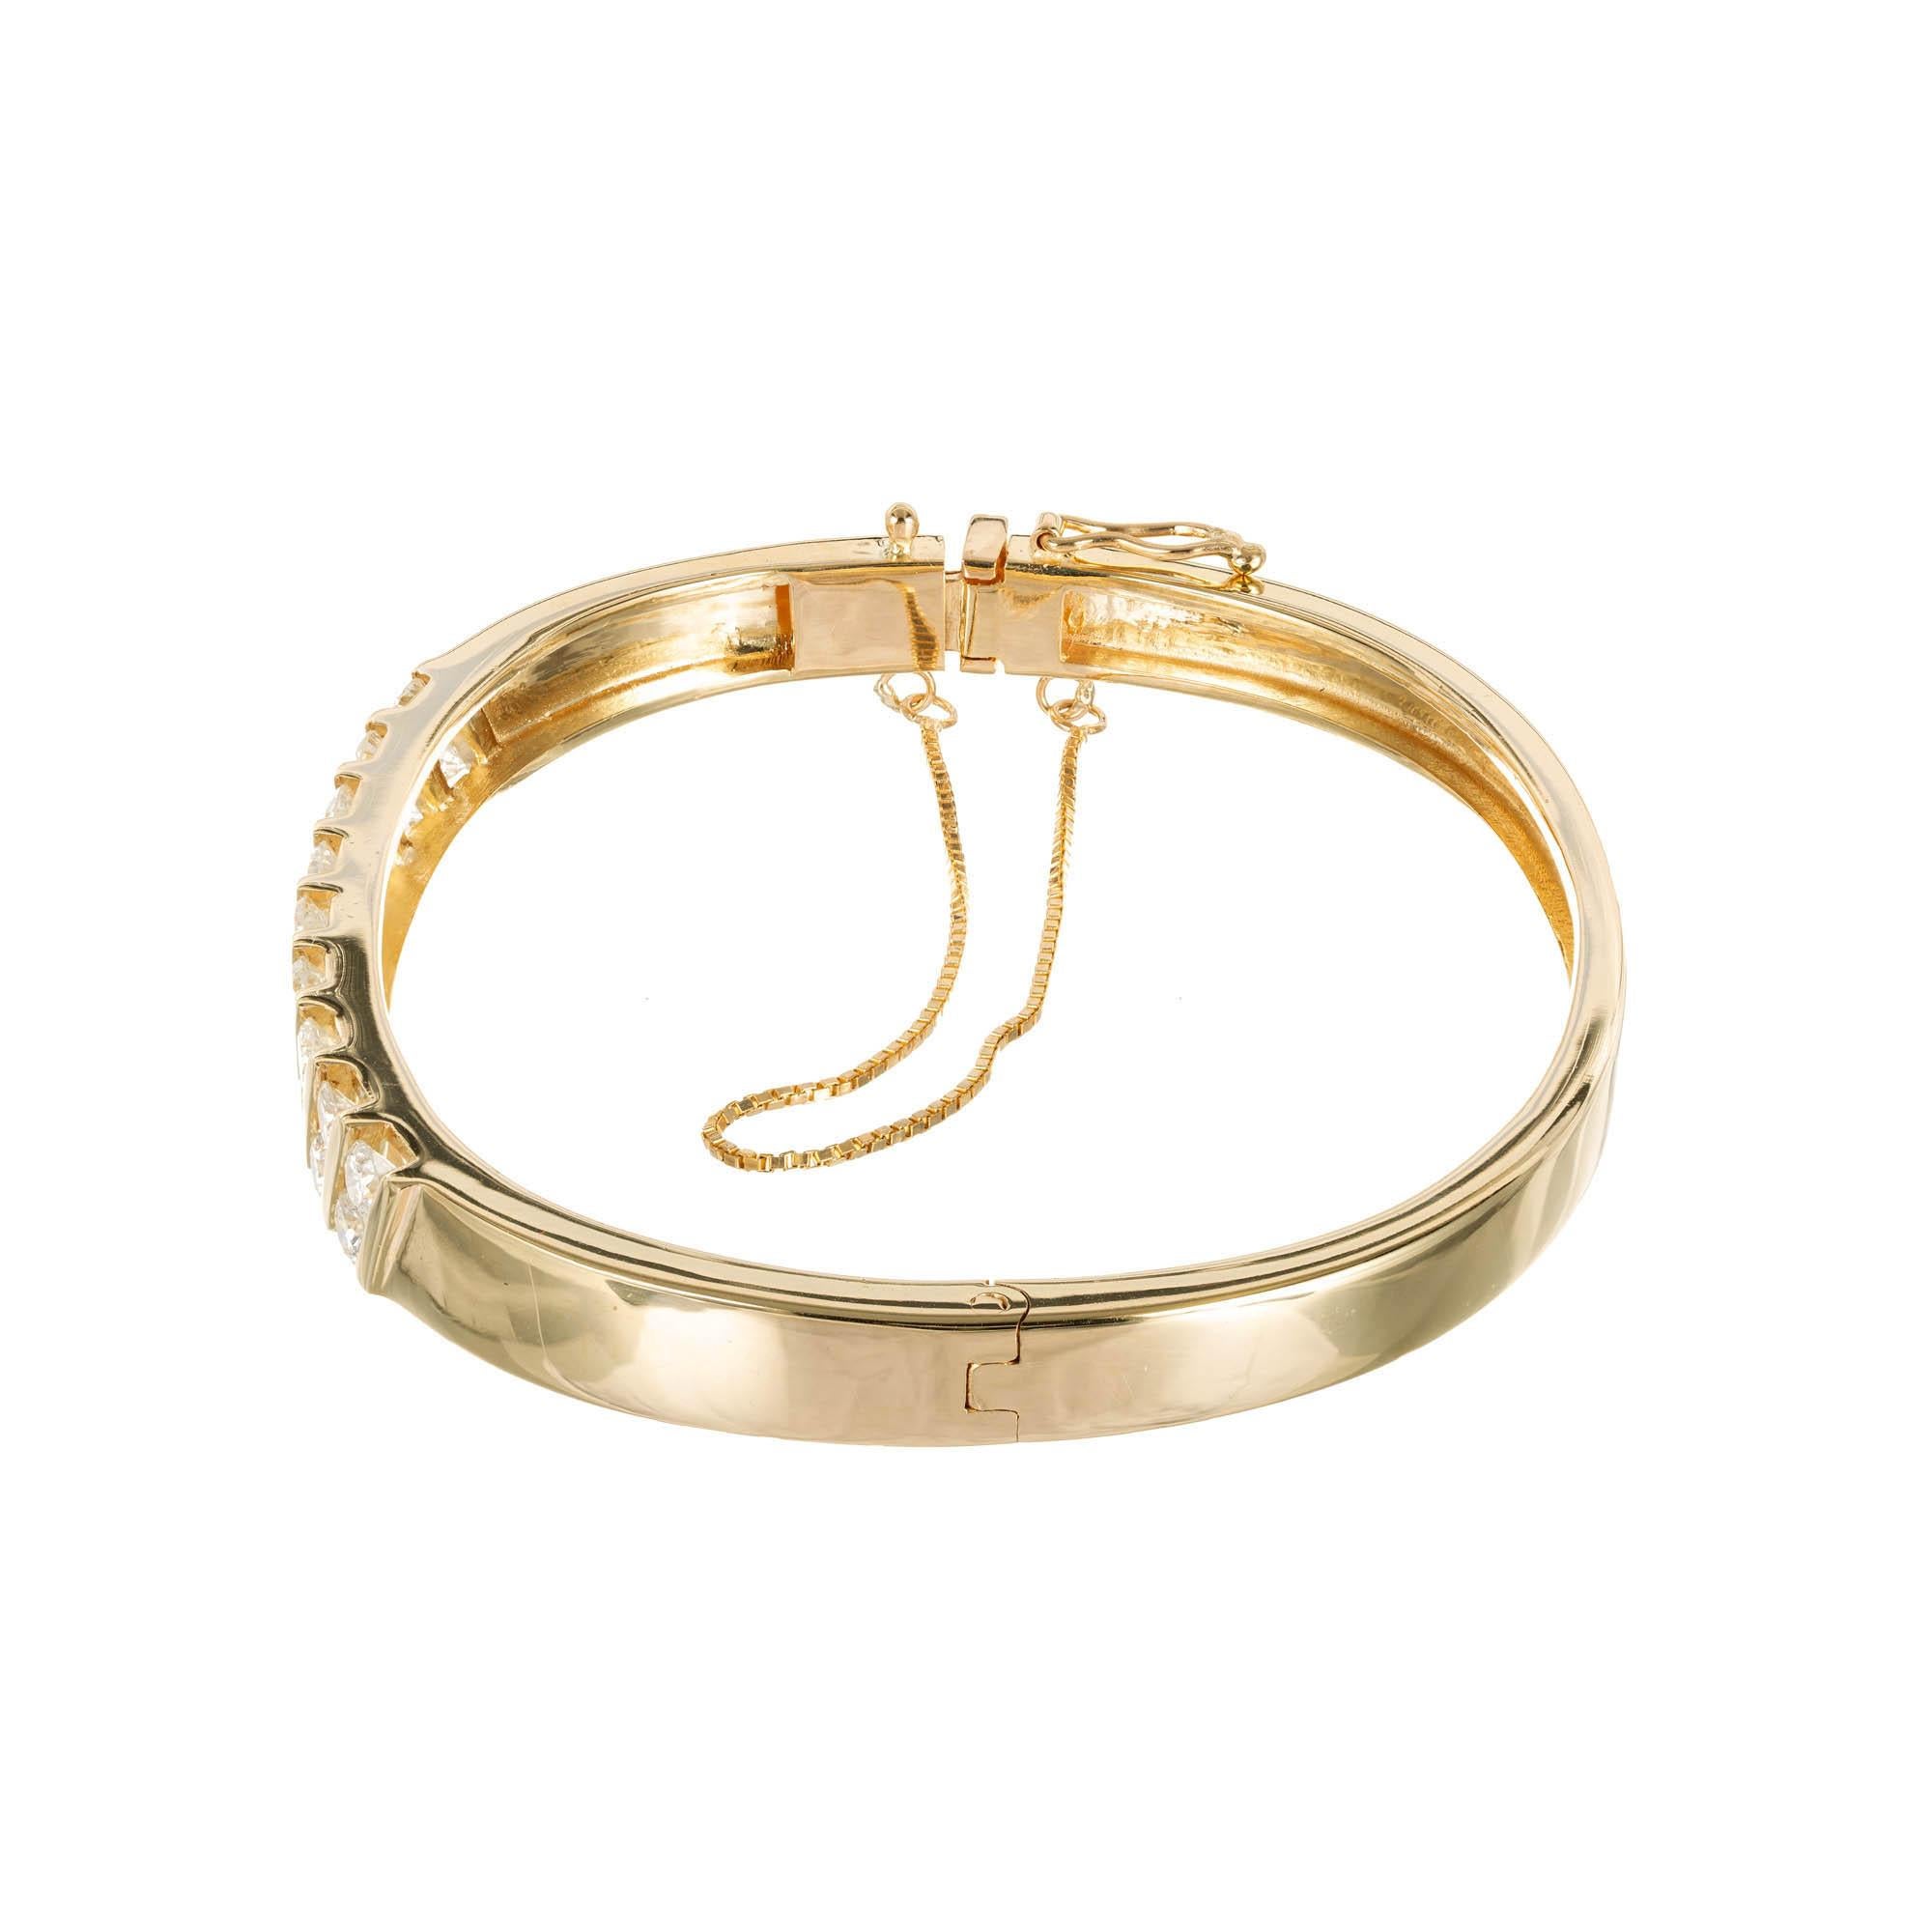 2.30 Carat Diamond Yellow Gold Bangle Bracelet In Good Condition For Sale In Stamford, CT